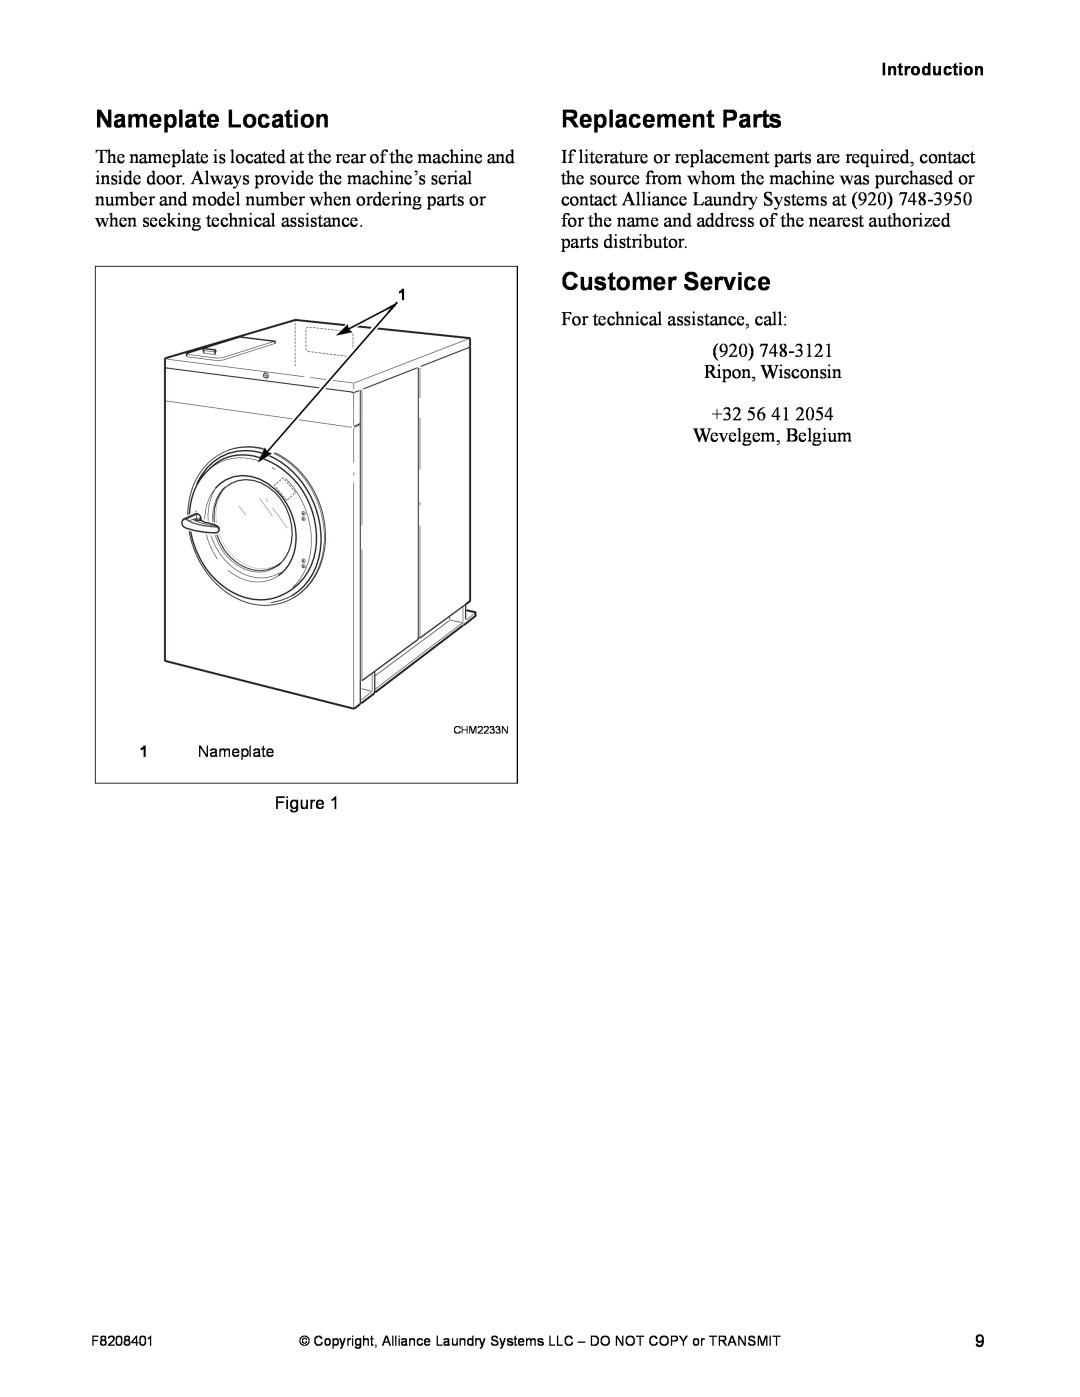 Alliance Laundry Systems CHM1772C manual Nameplate Location, Replacement Parts, Customer Service 